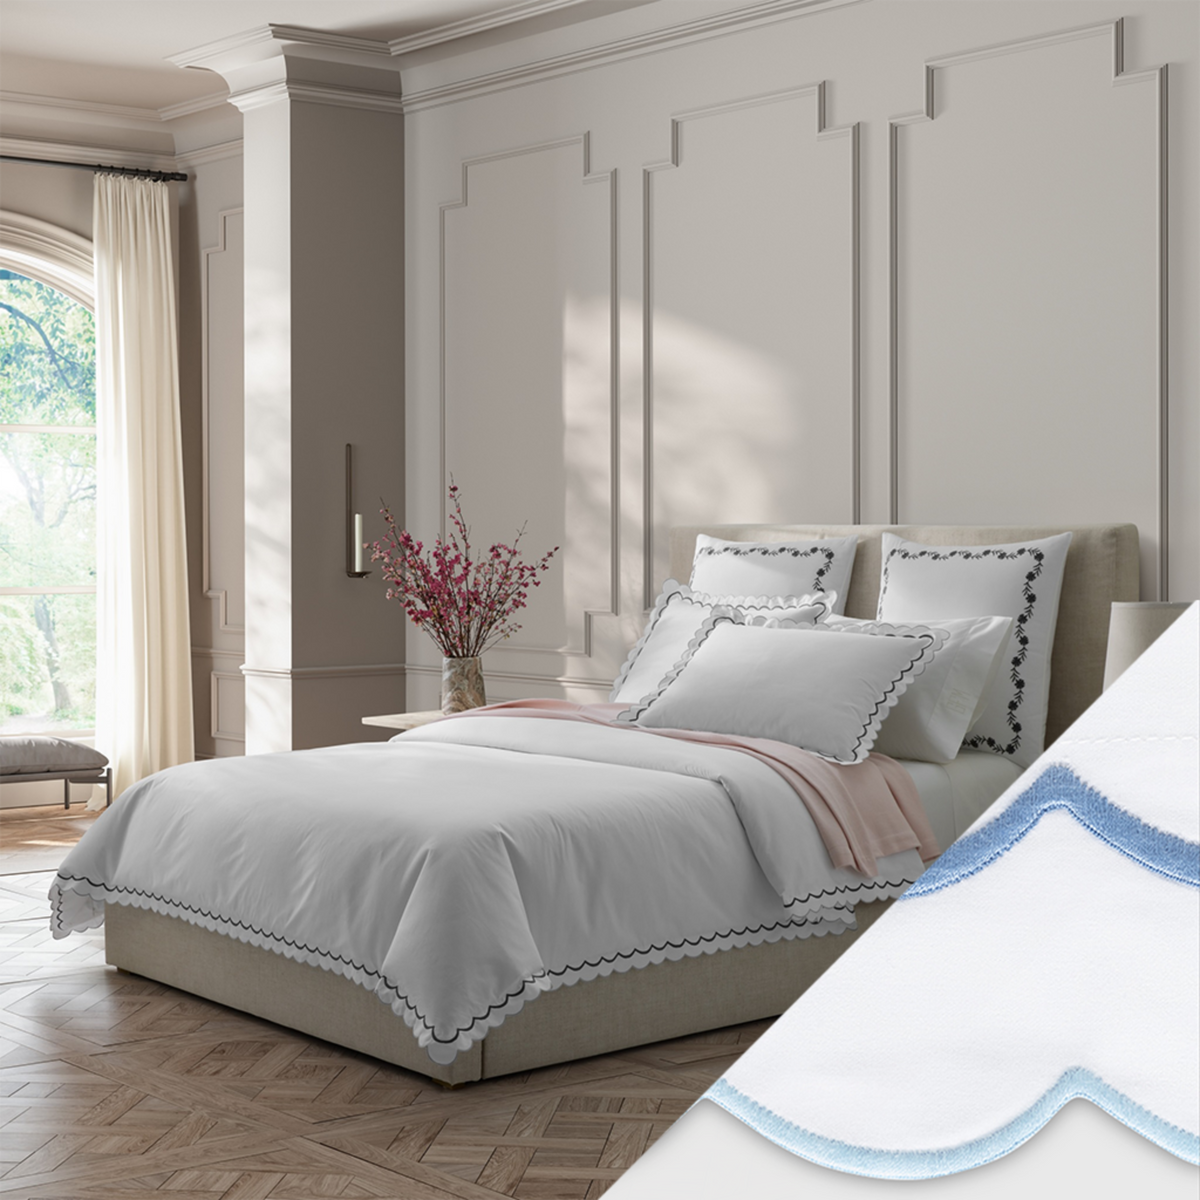 Full Bed Dressed in Matouk India Bedding in Charcoal Color with Azure Swatch